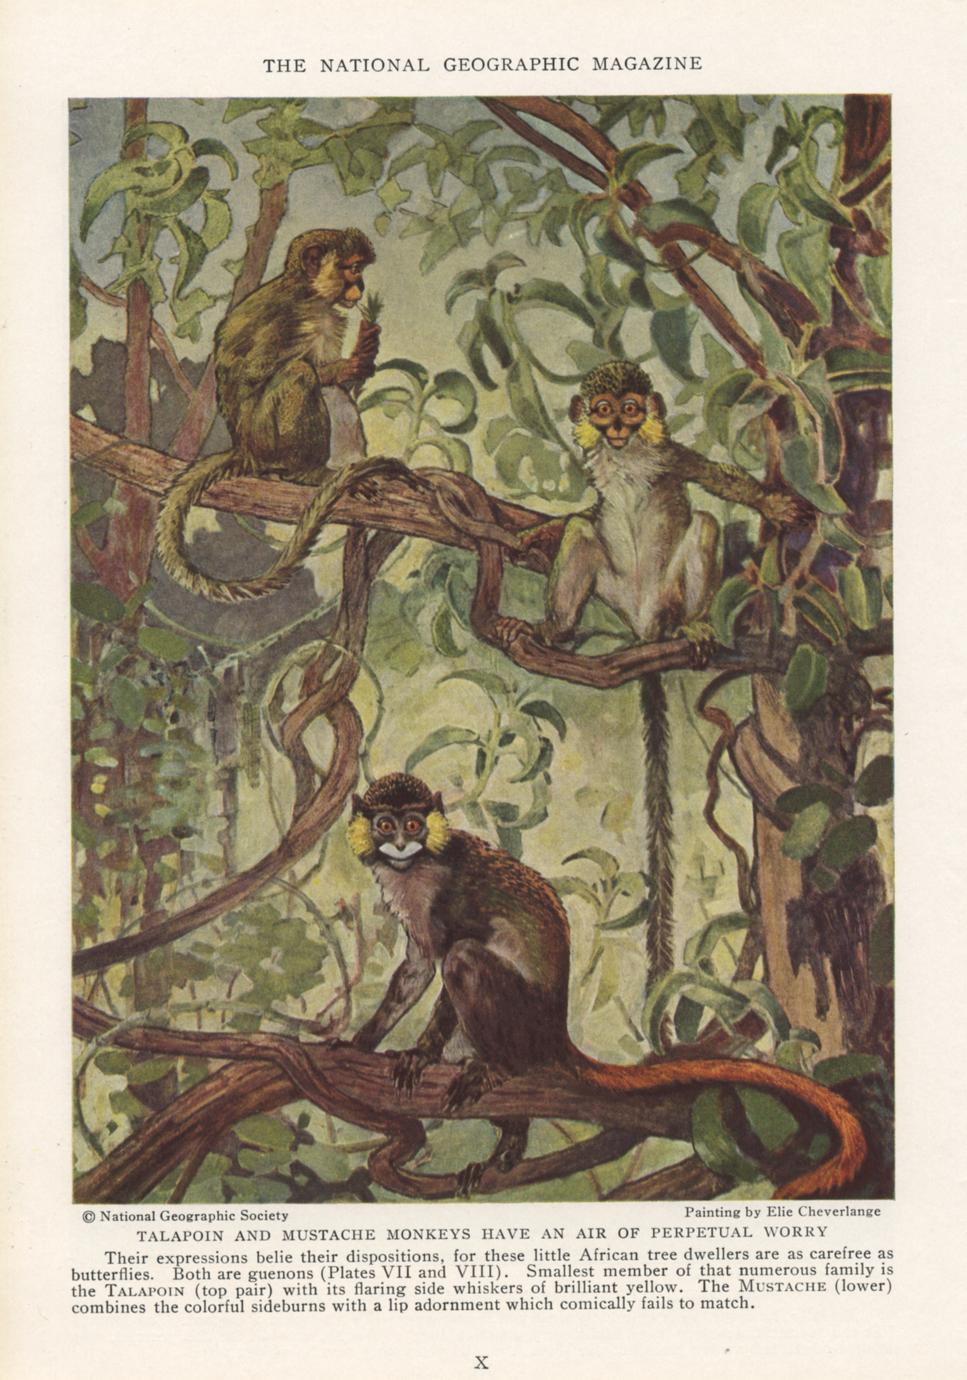 Talapoin and Mustached Monkeys